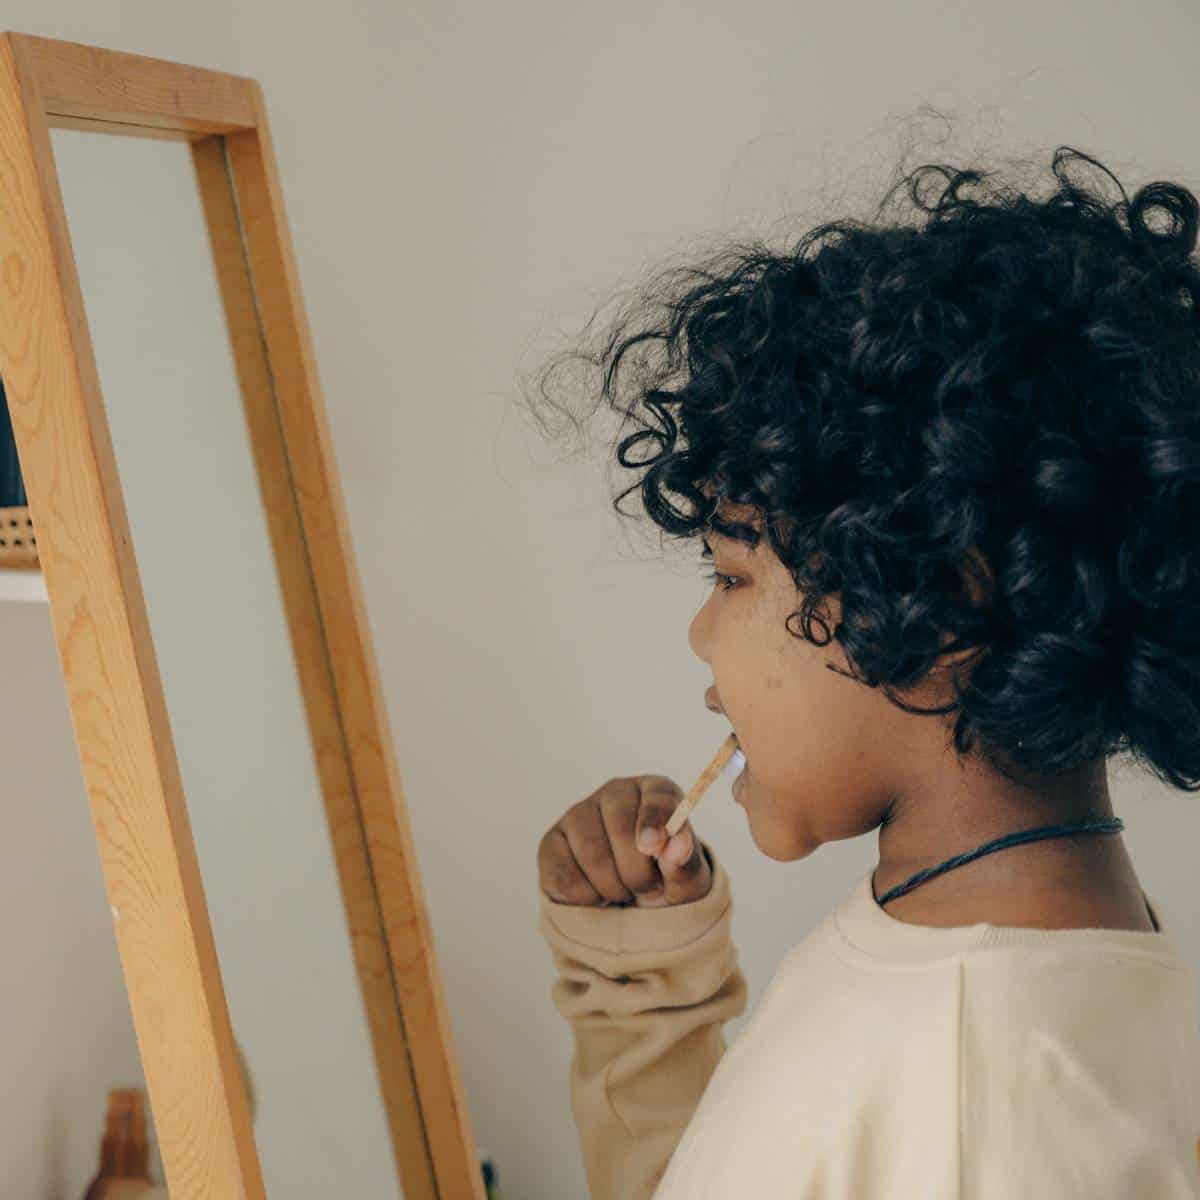 Toddler child with black curly hair standing in front of a mirror brushing his teeth with a wood toothbrush. 